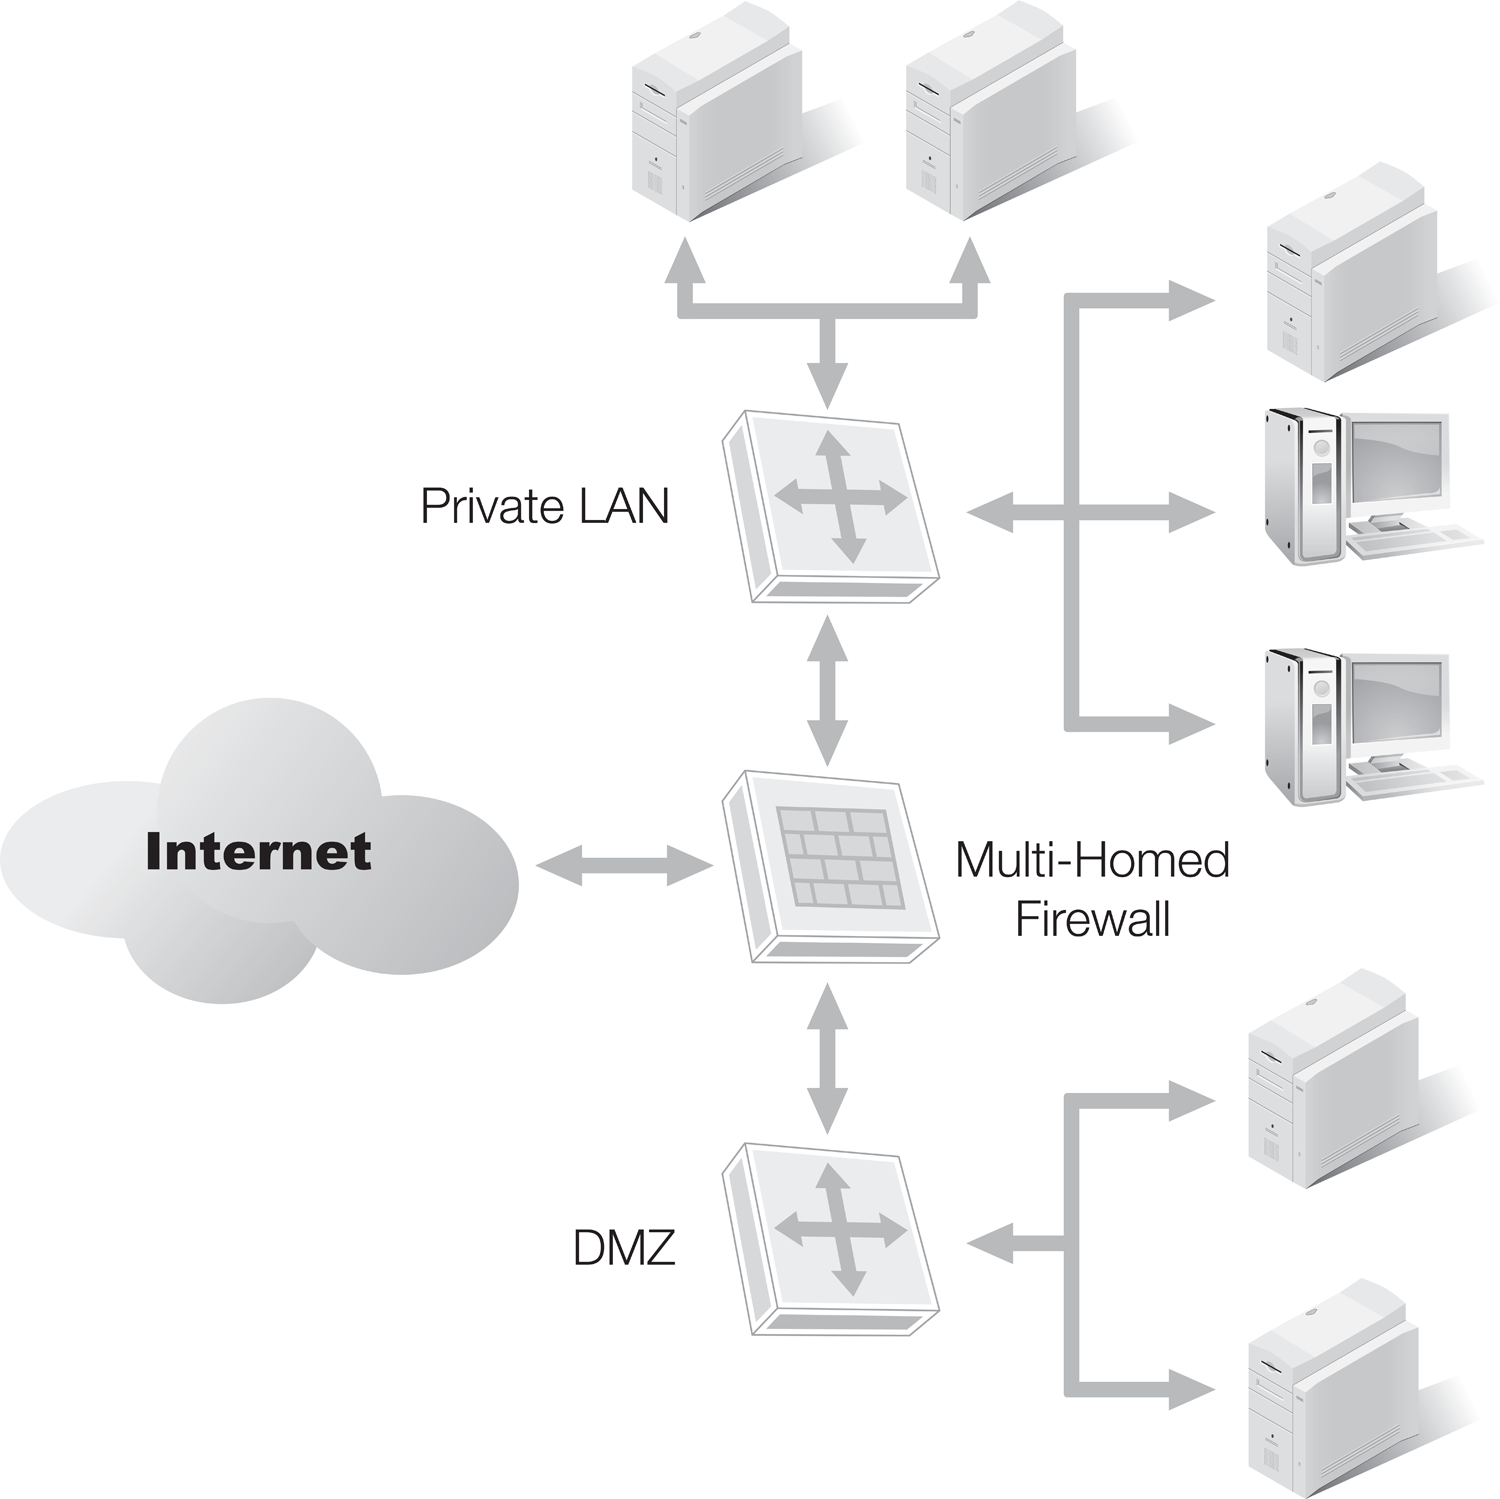 A diagram of a basic multi-homed firewall for two network segments.